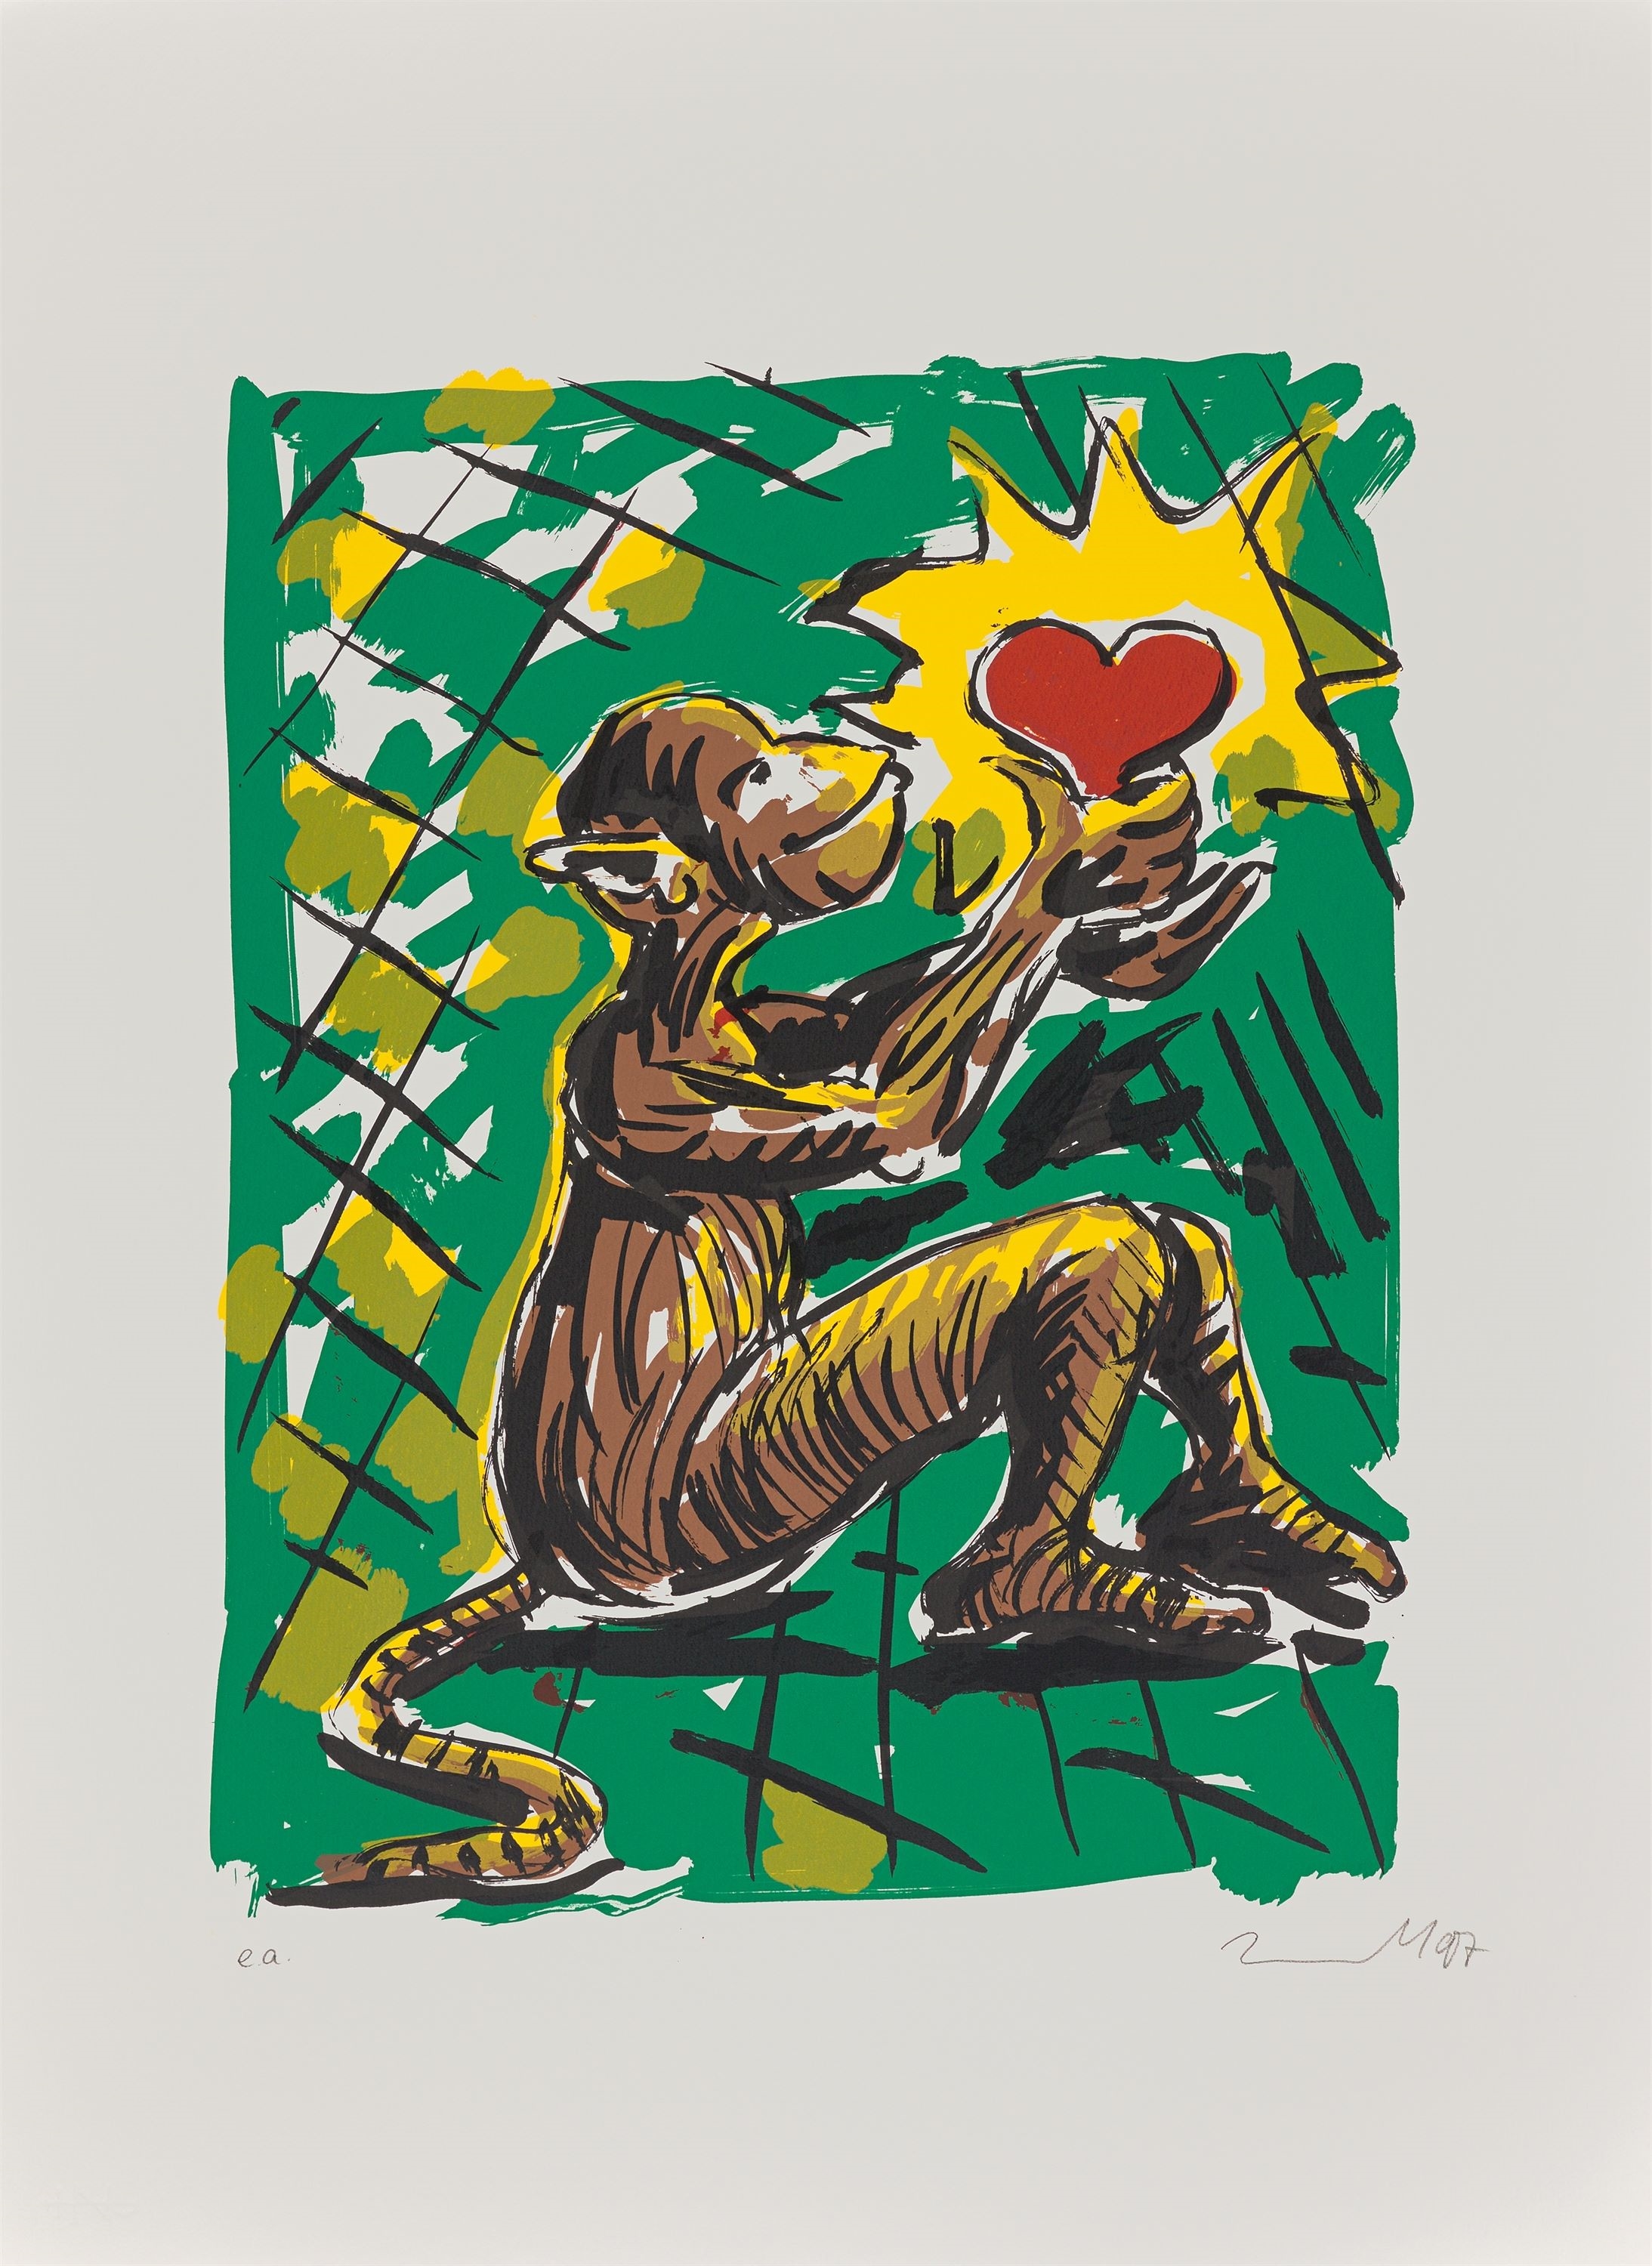 ”Ohne Titel” (Monkey with a heart). by Jörg Immendorff, 1997